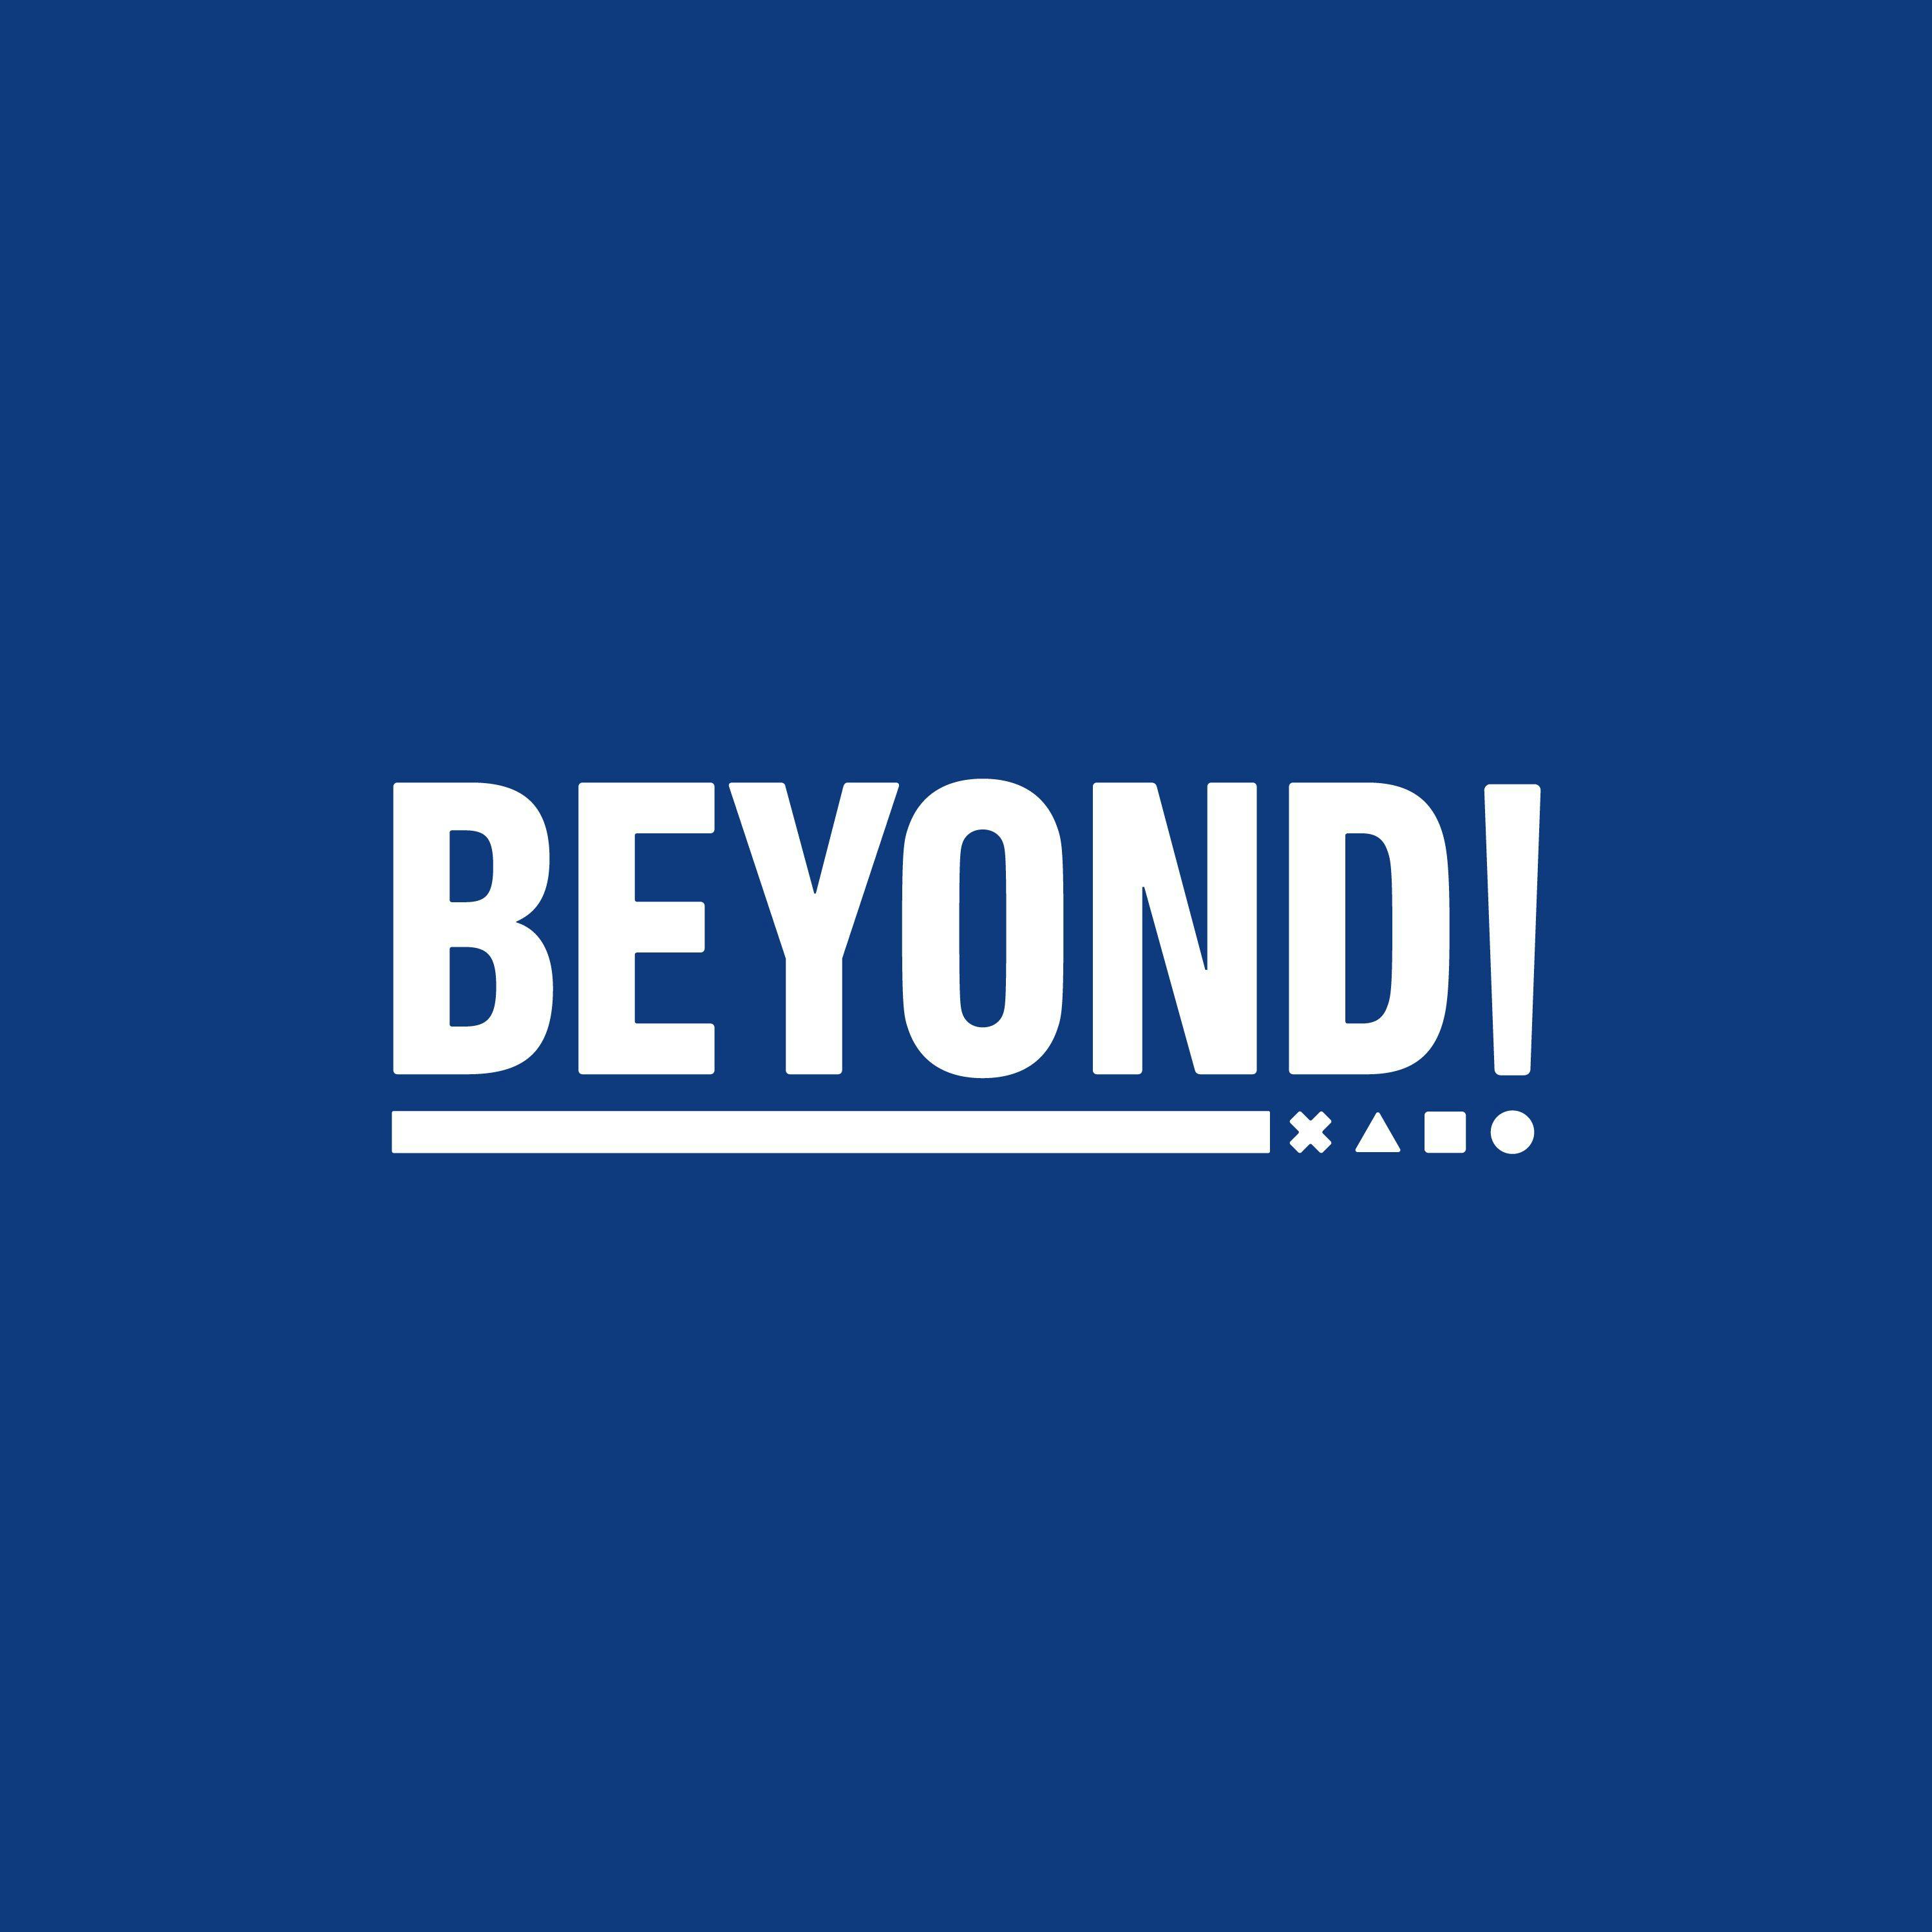 PS5: Sony Looks to Have Even More Exclusives - Beyond Episode 664